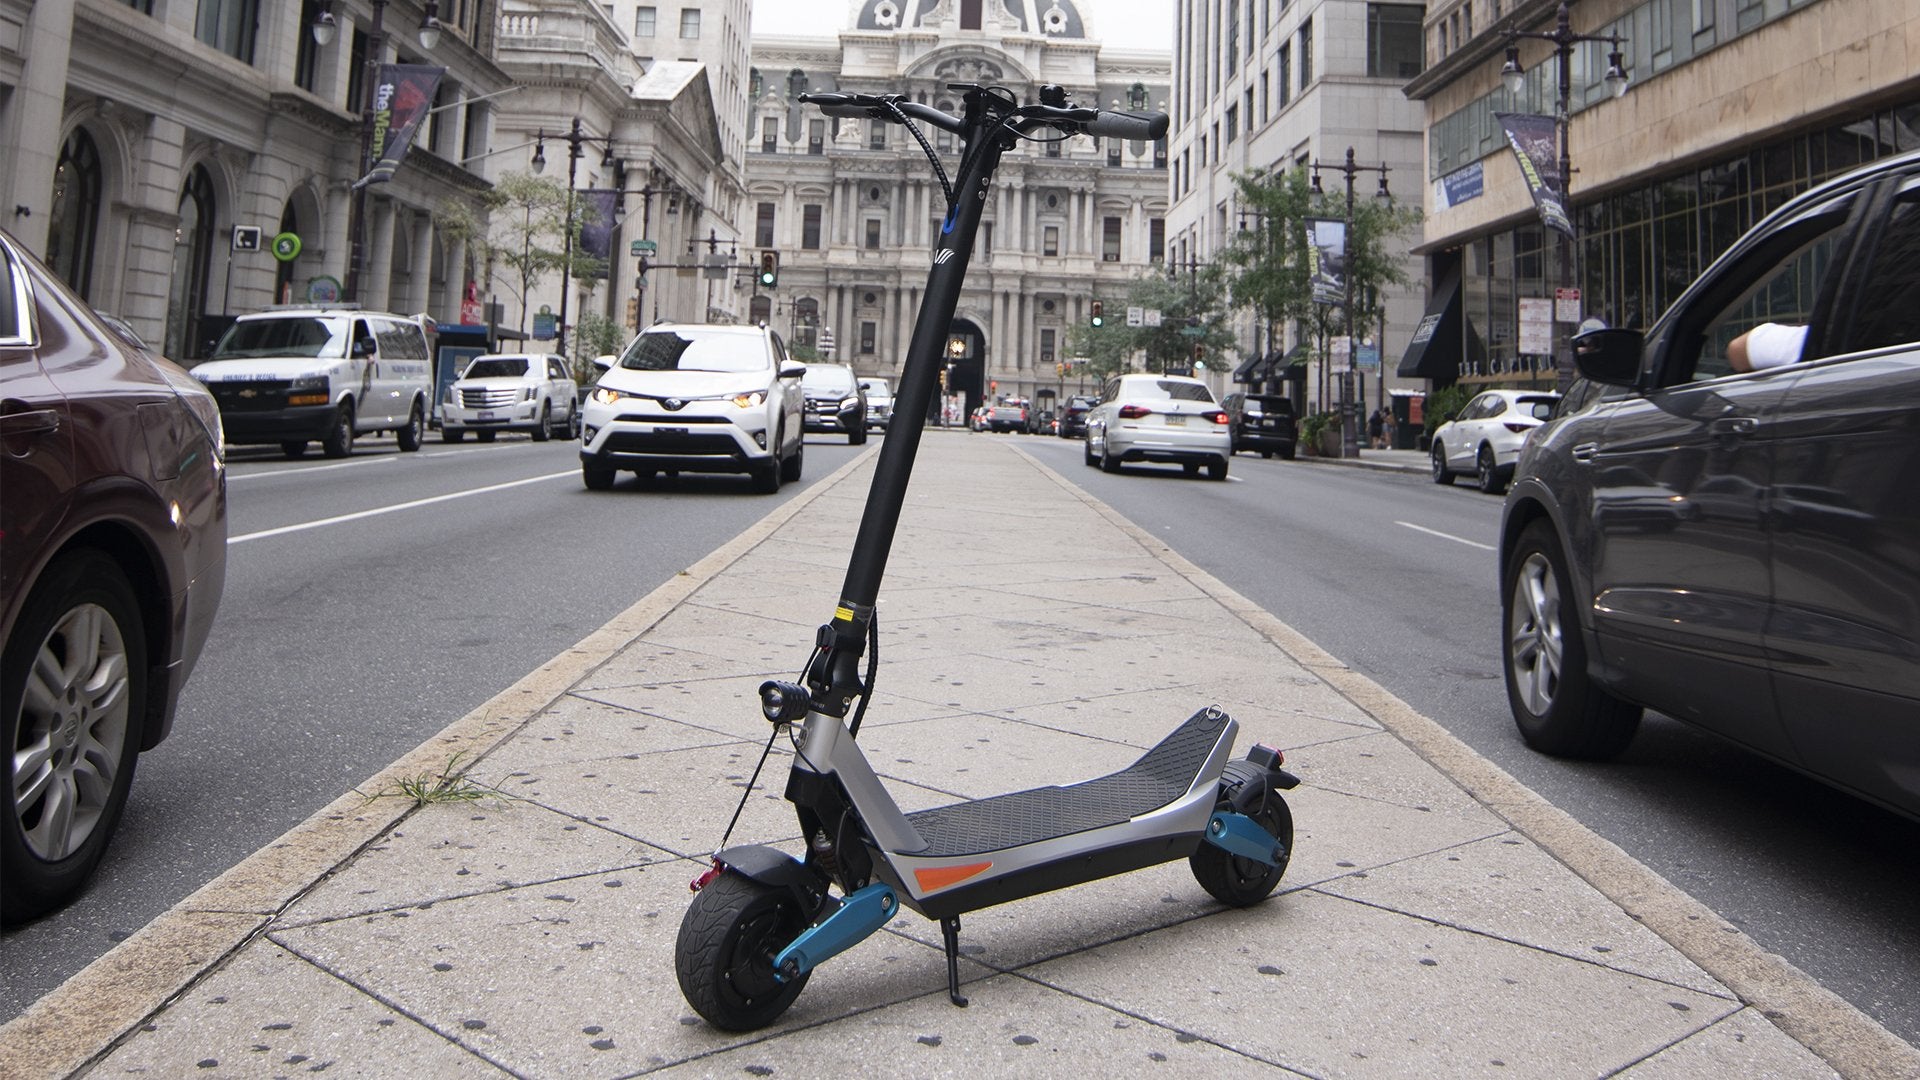 Are Electric Scooters A Good Way to Travel in Cities?